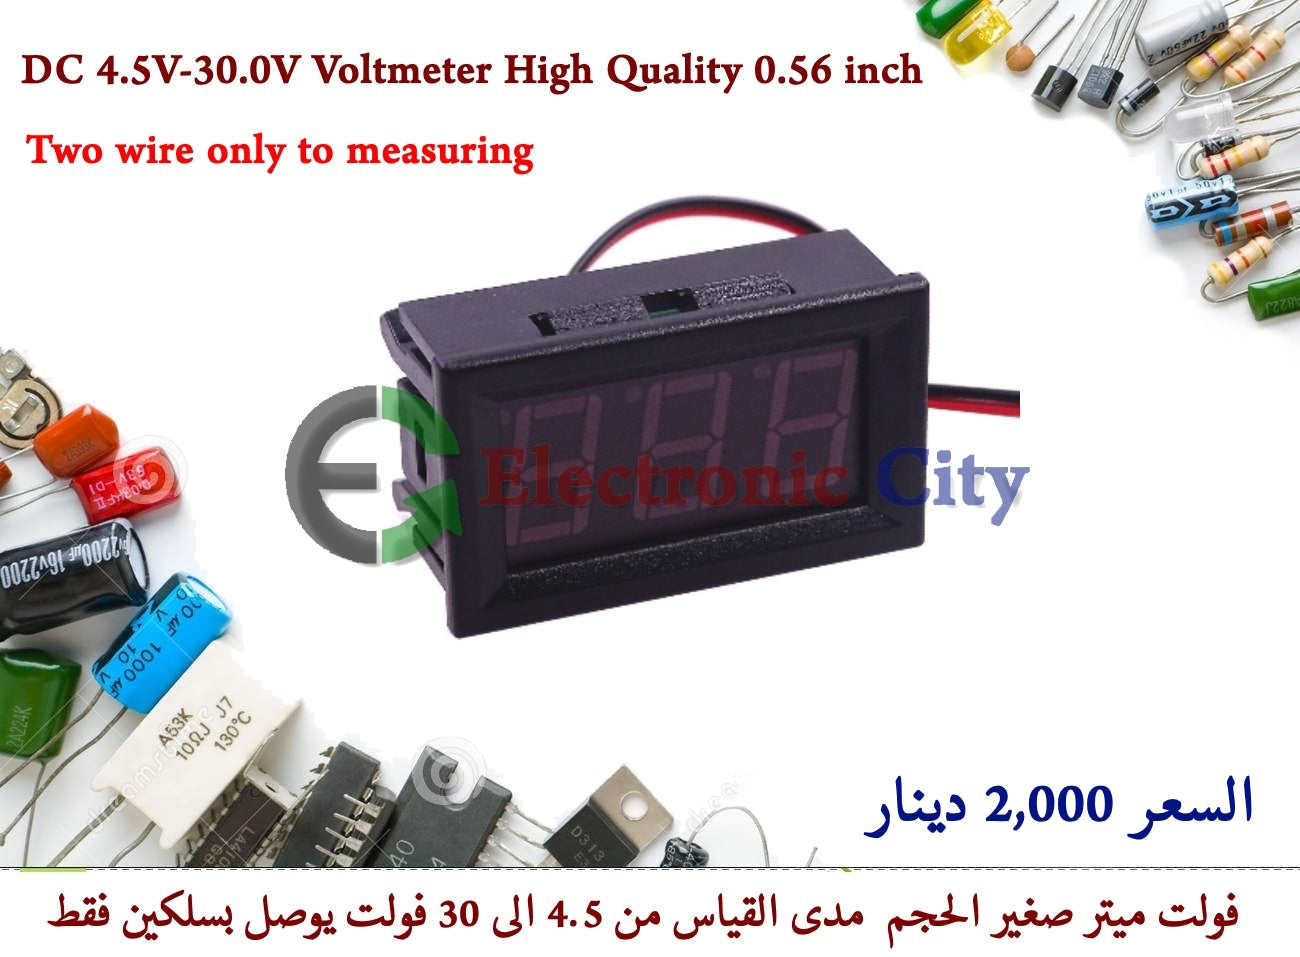 DC 4.5V-30.0V Voltmeter 0.56 inch Two wire only to measuring #E4 030518HO